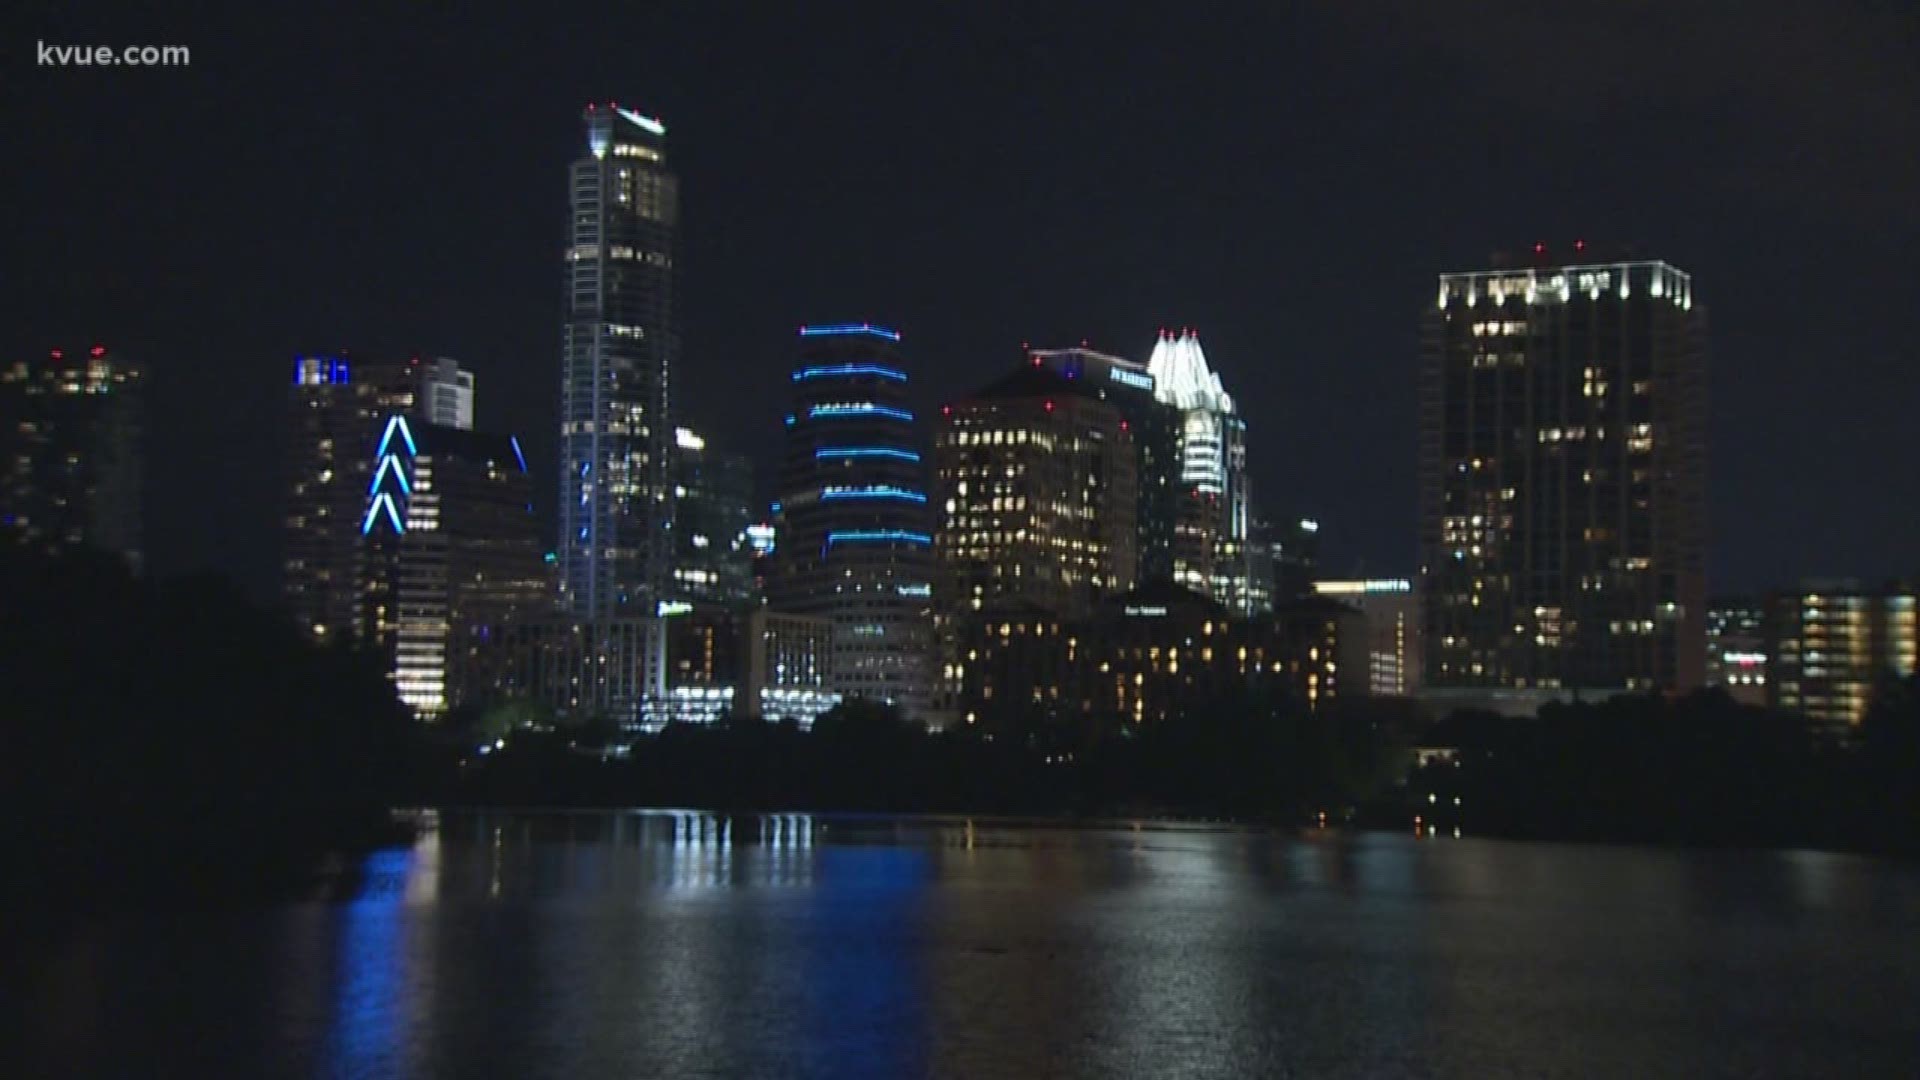 After KVUE's Boomtown special, Michael Perchick answers some of your questions about Austin's booming growth.